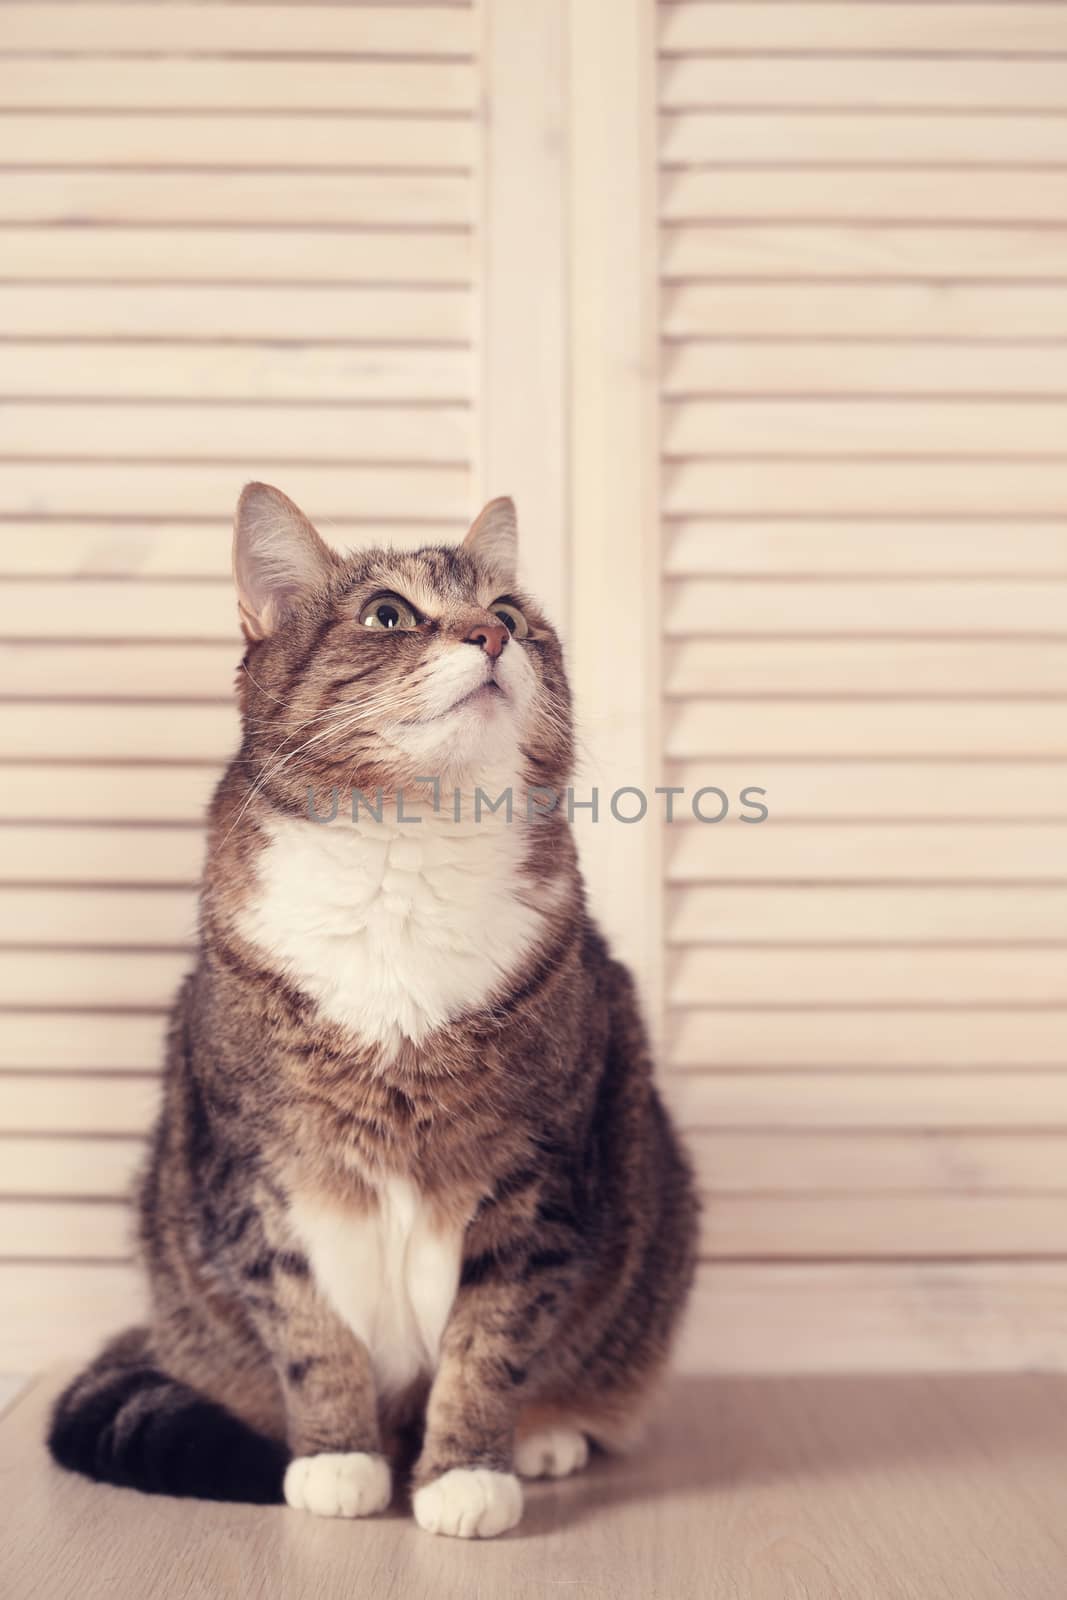 Cat sitting on wooden background close-up view